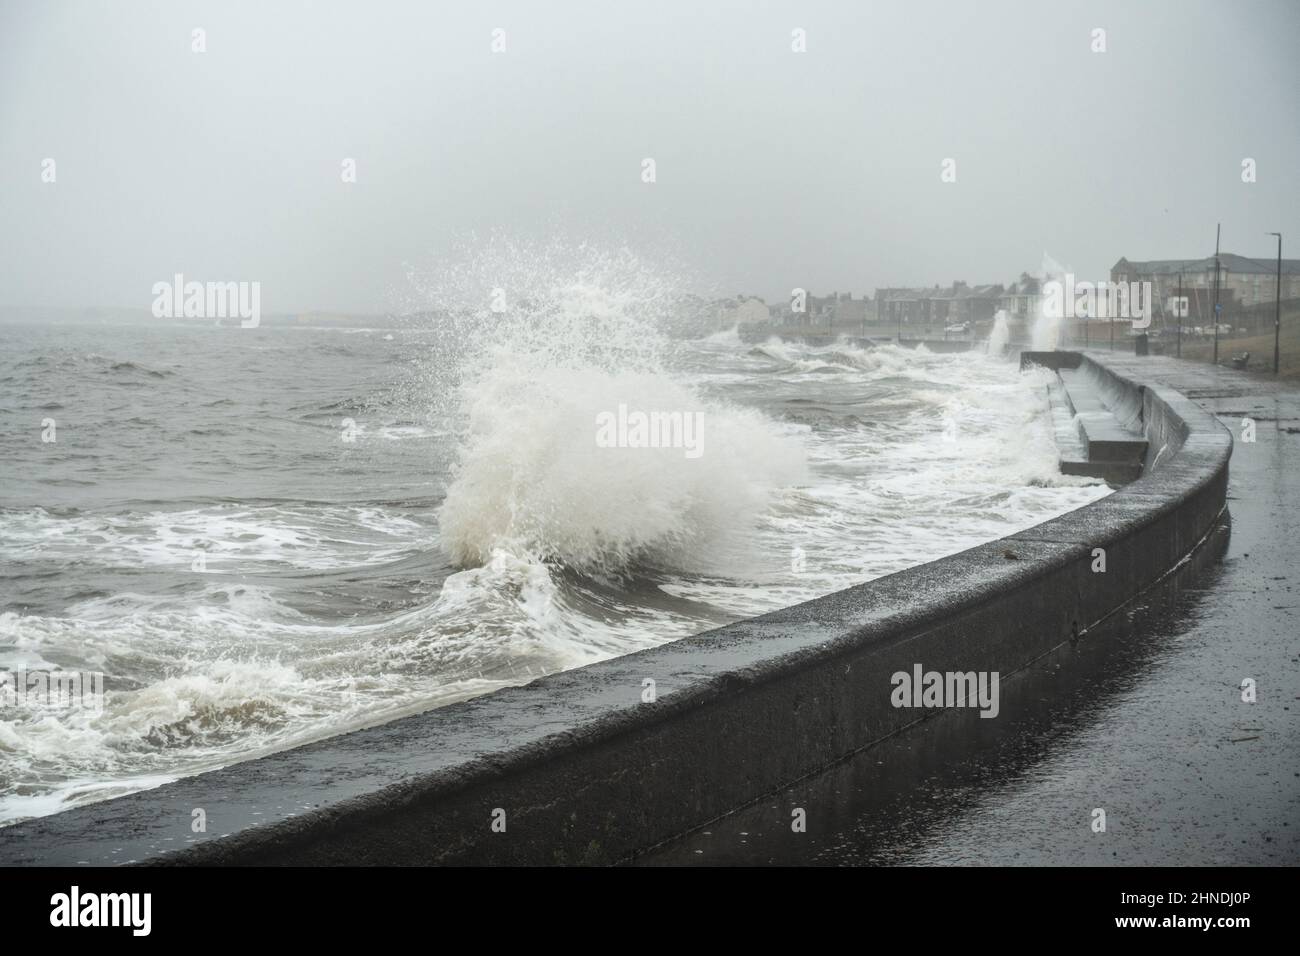 Prestwick, Scotland, UK; 16th February 2022. A High Tide ahead of Storm Dudley brings waves crashing up onto the Promenade at Prestwick Seafront, South Ayrshire.   Liz Leyden/Alamy Live News Stock Photo